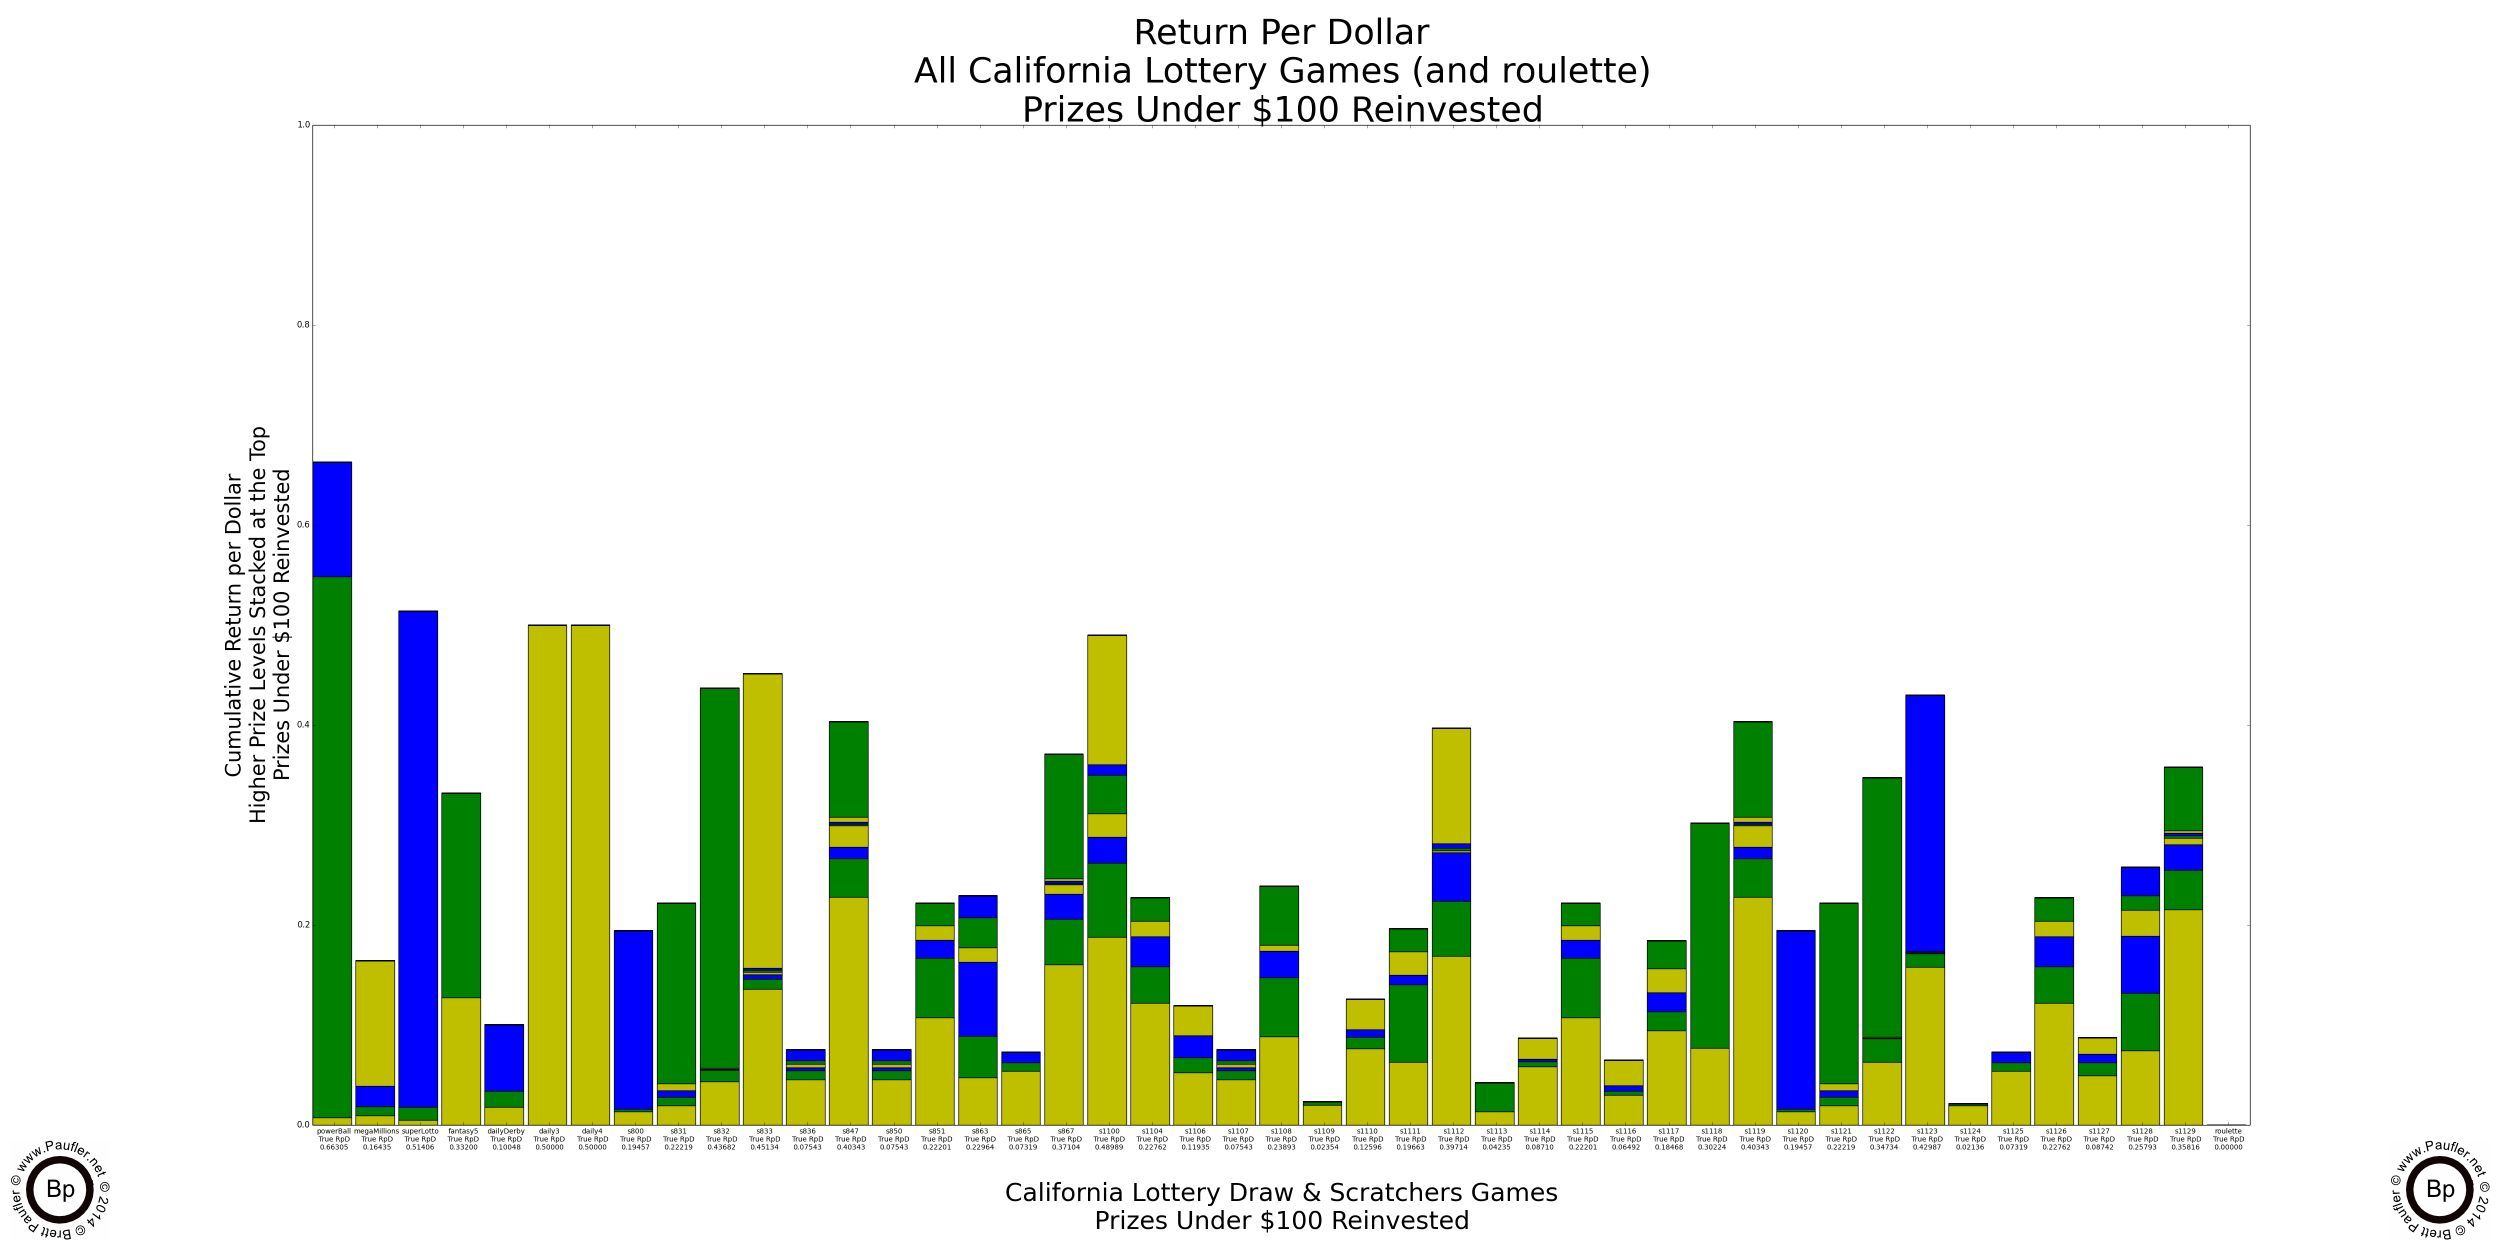 Graph of California Lottery Return per Dollar with Prizes below $100 Reinvested